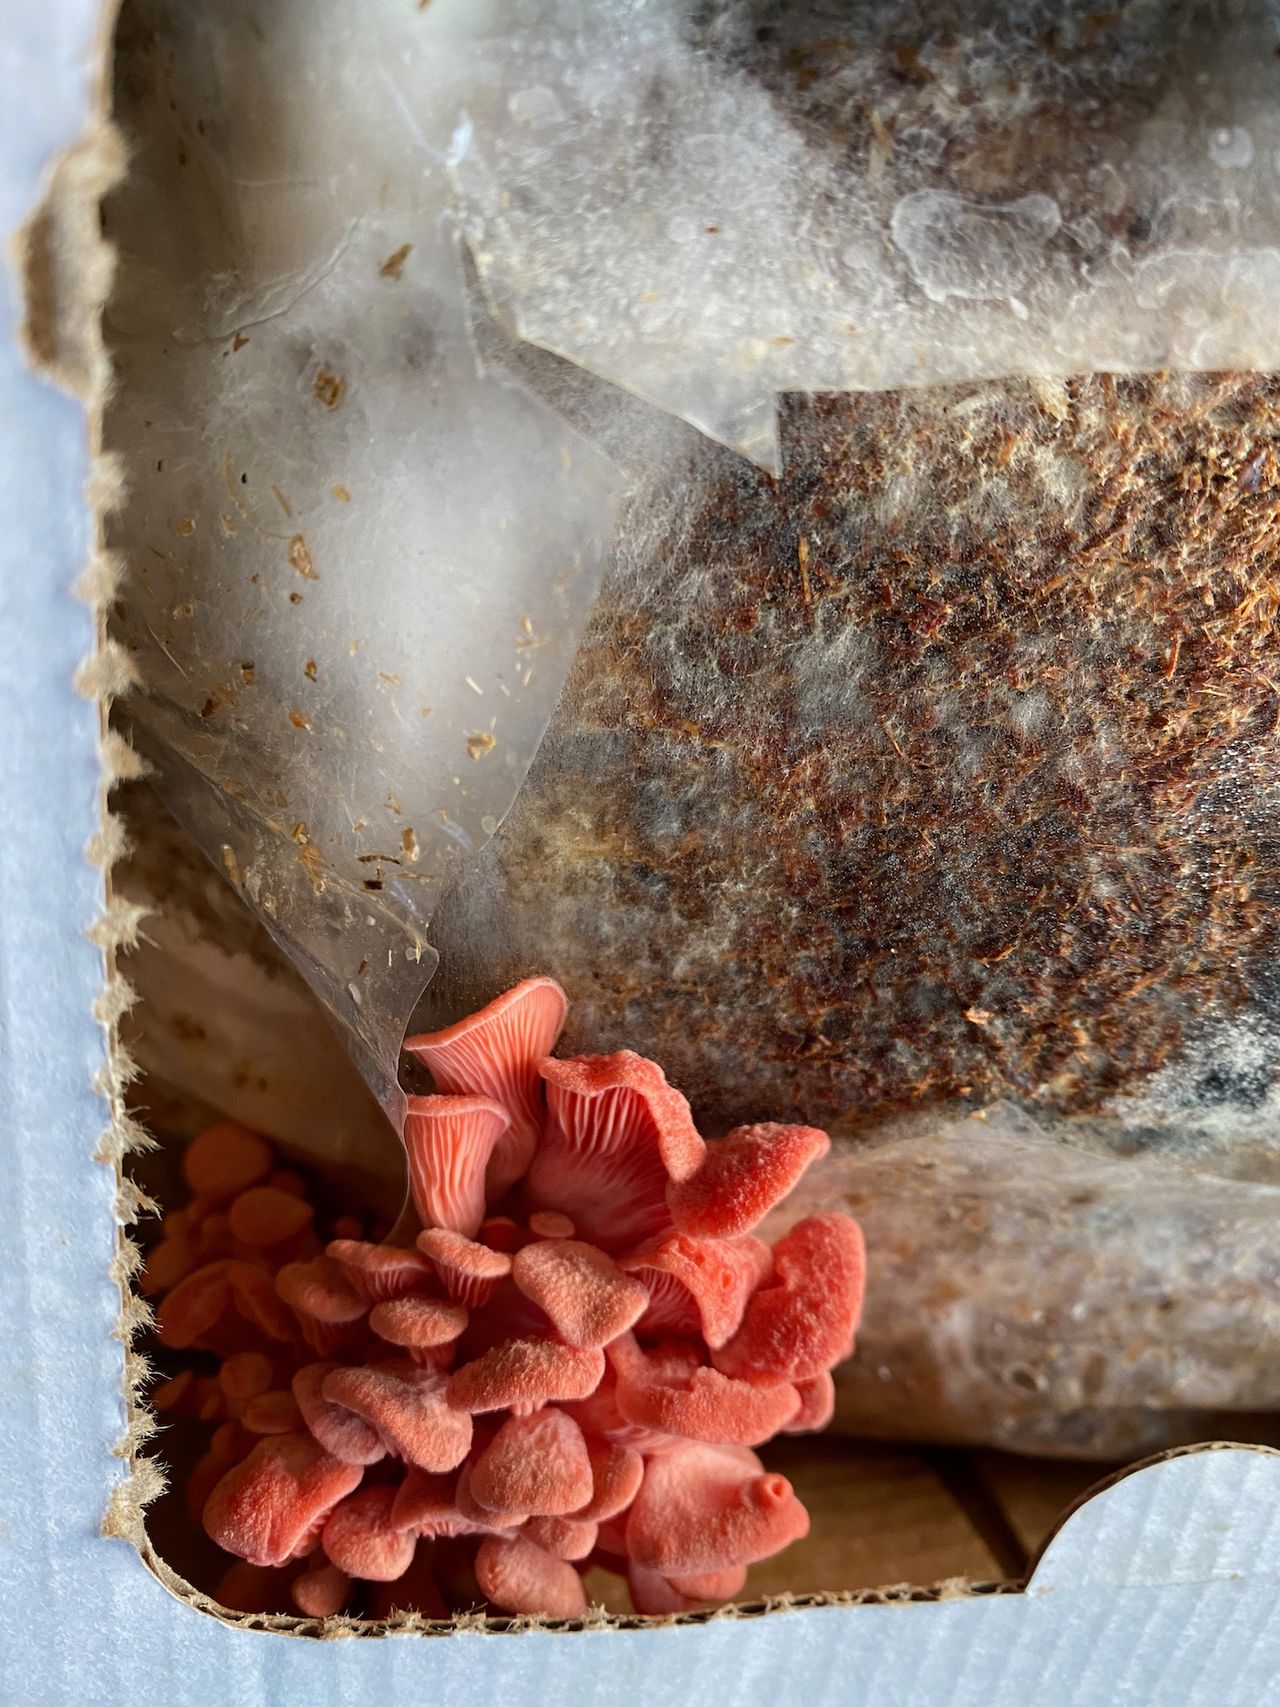 Tiny pink oyster mushrooms just starting to bloom with a large amount of brown spawn behind them.